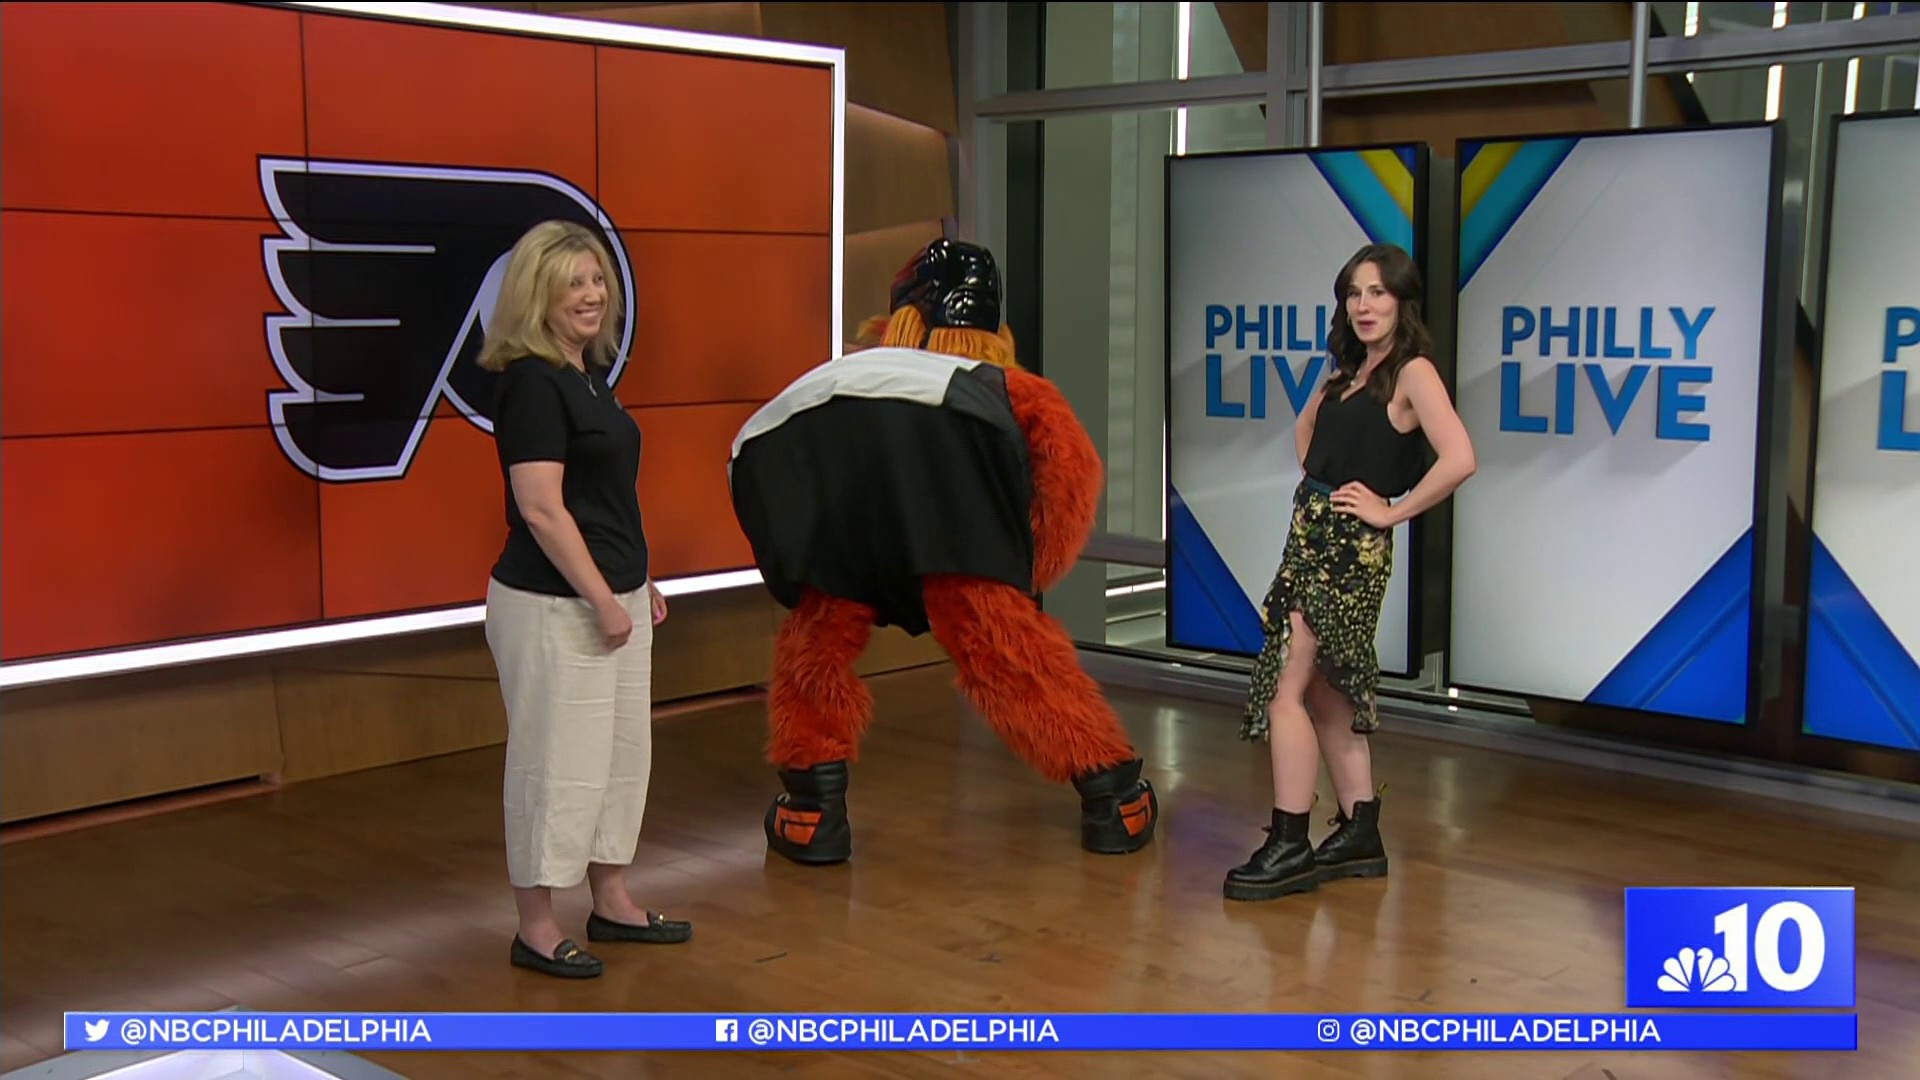 Where did the time go?' Flyers mascot, Gritty, turns 5 